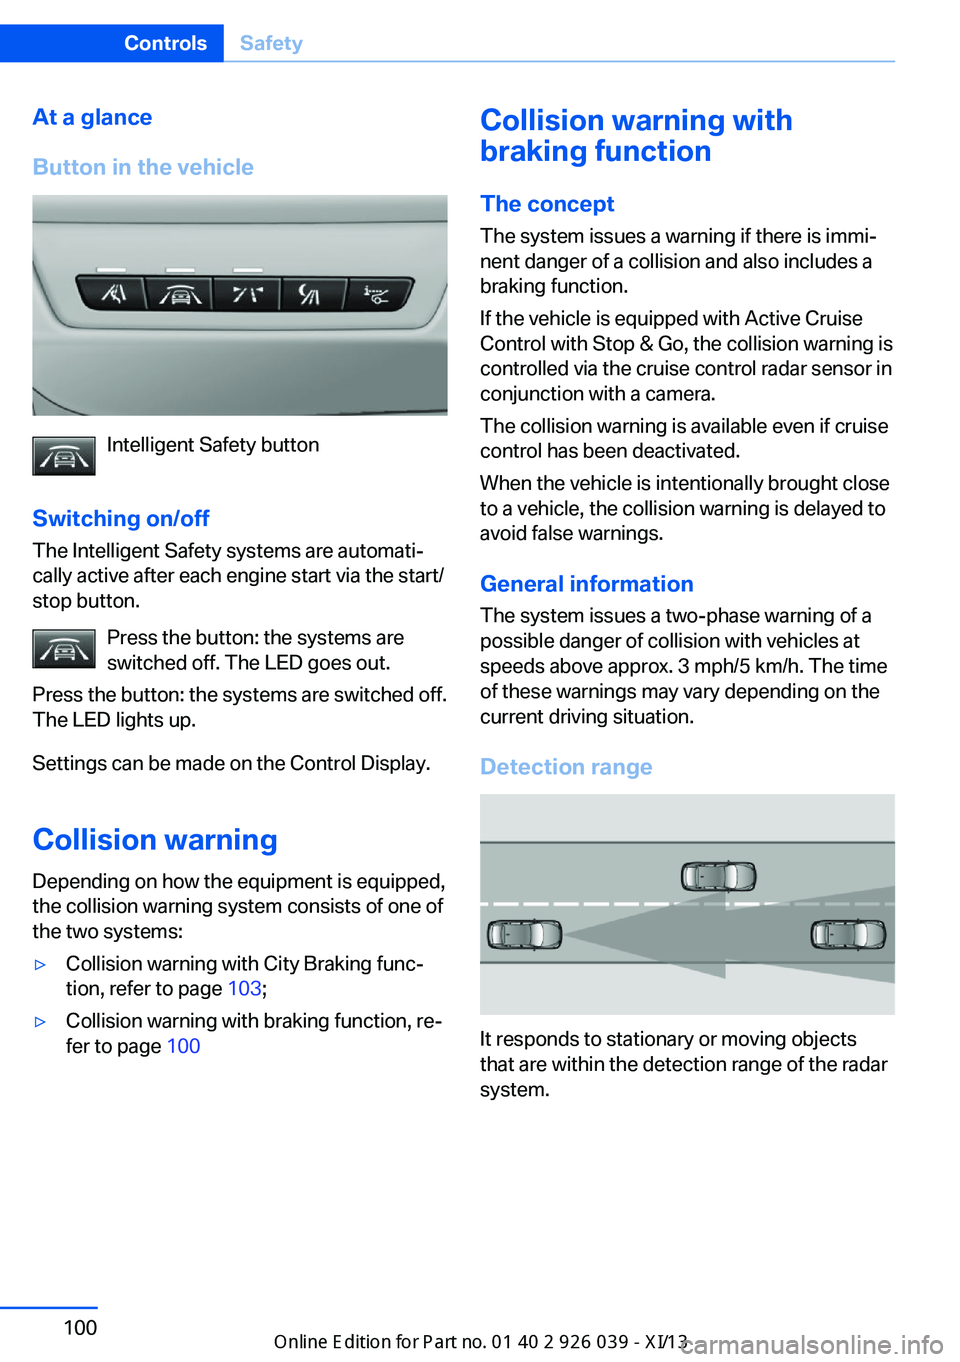 BMW 6 SERIES COUPE 2013 F13 Owners Manual At a glance
Button in the vehicle
Intelligent Safety button
Switching on/off The Intelligent Safety systems are automati‐
cally active after each engine start via the start/
stop button.
Press the b